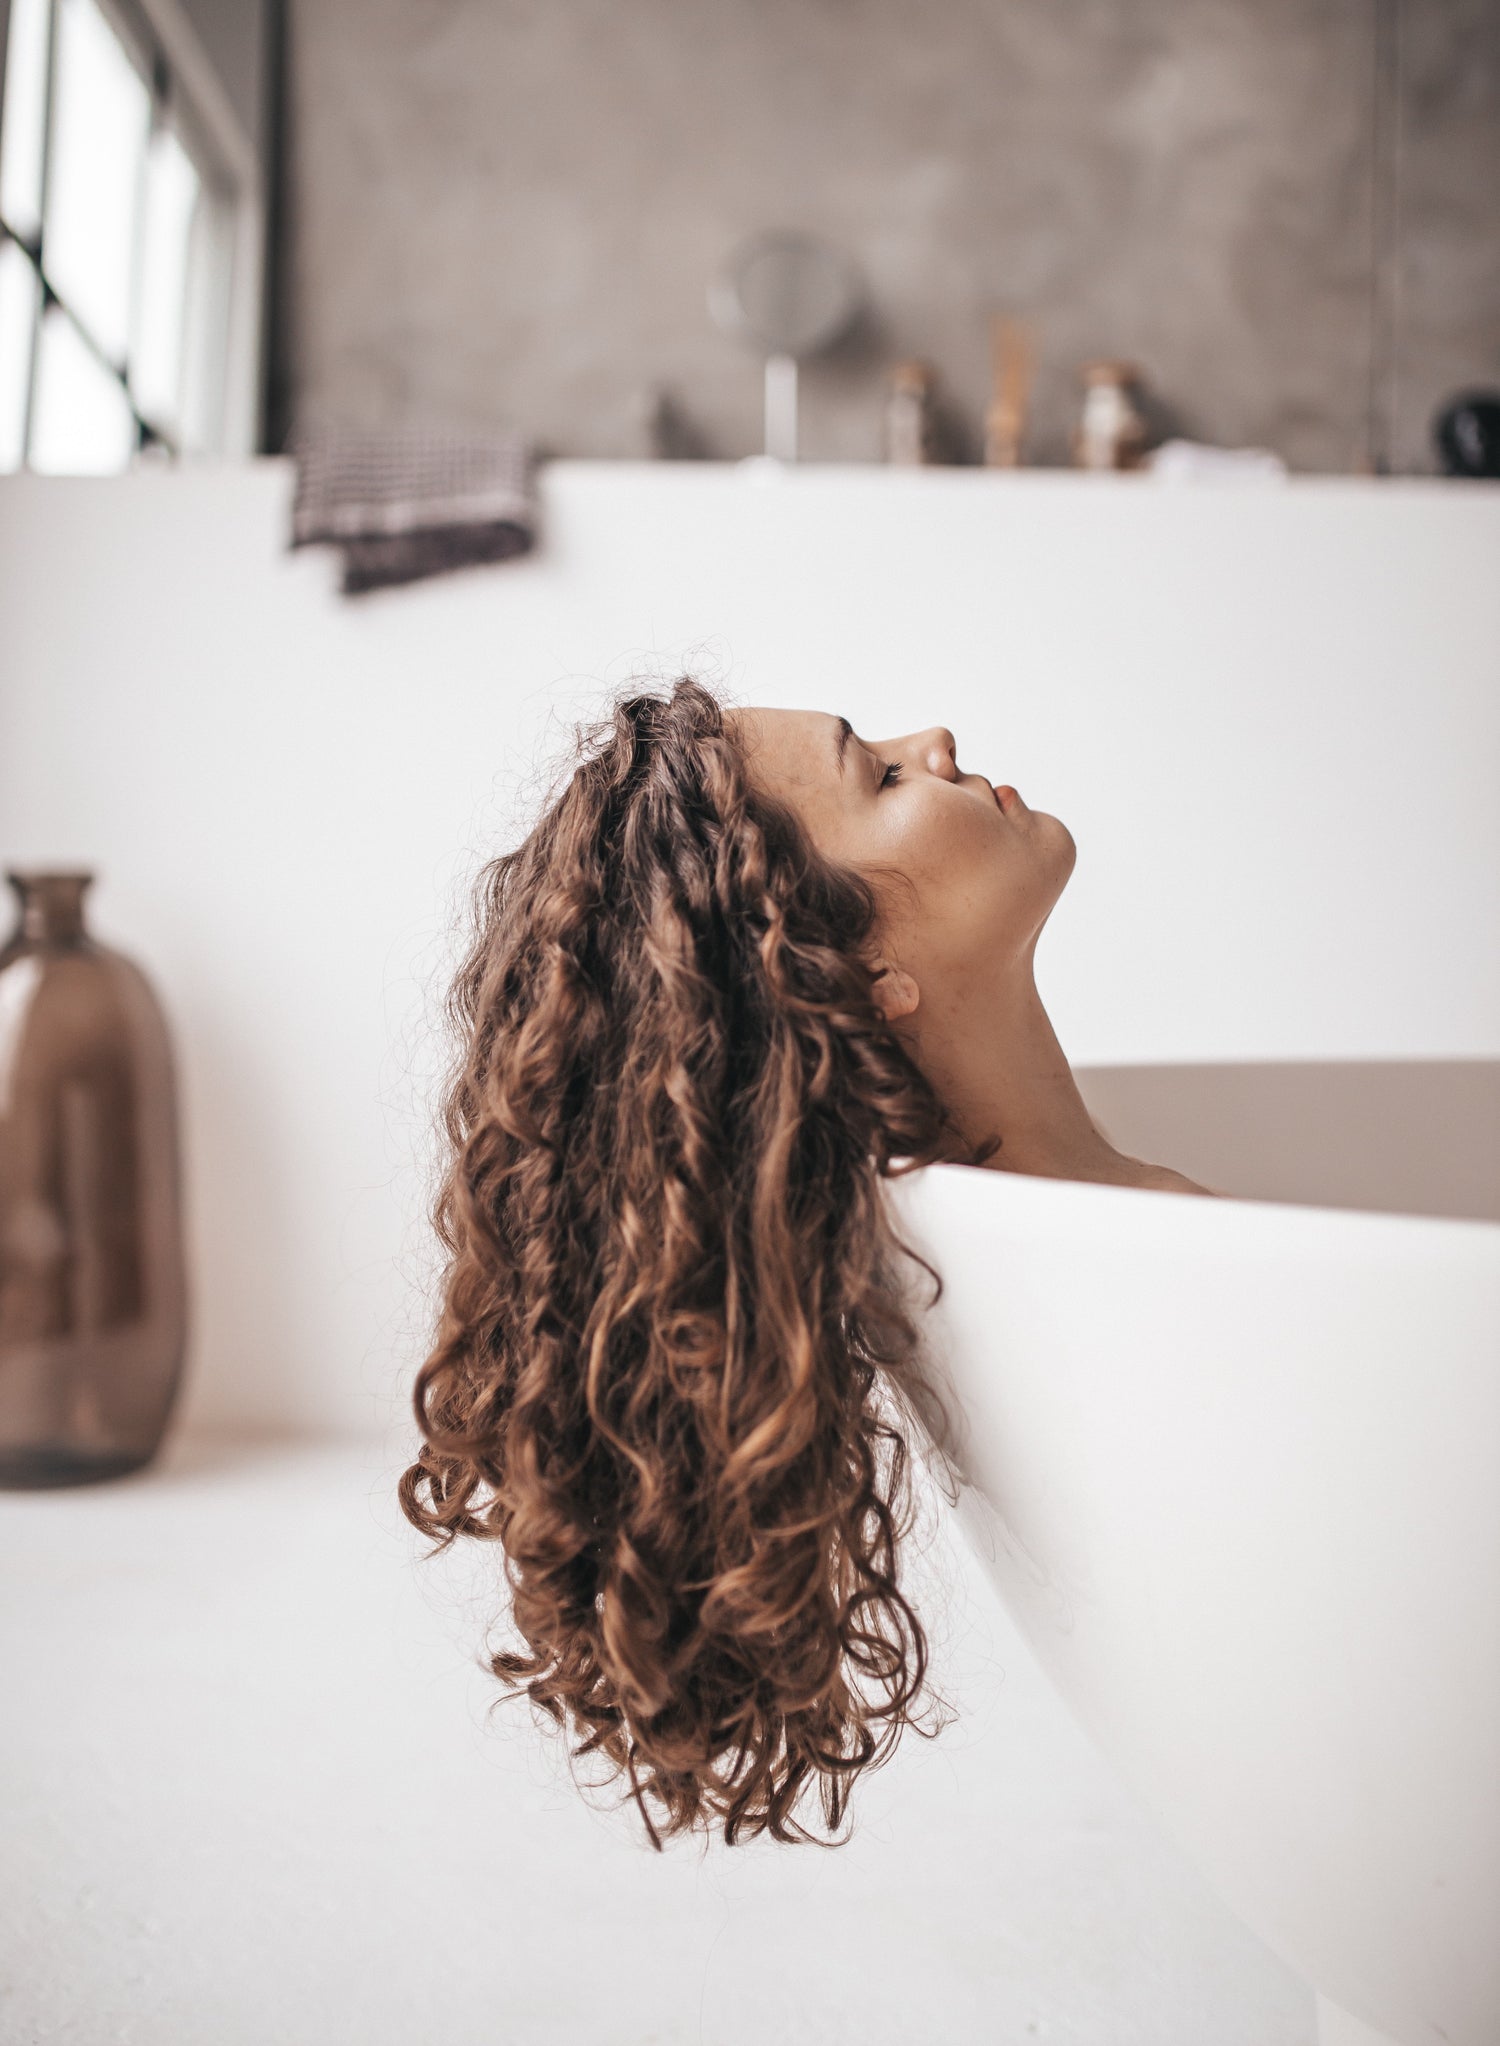 Woman in a tub with beautiful curly hair flowing over the edge